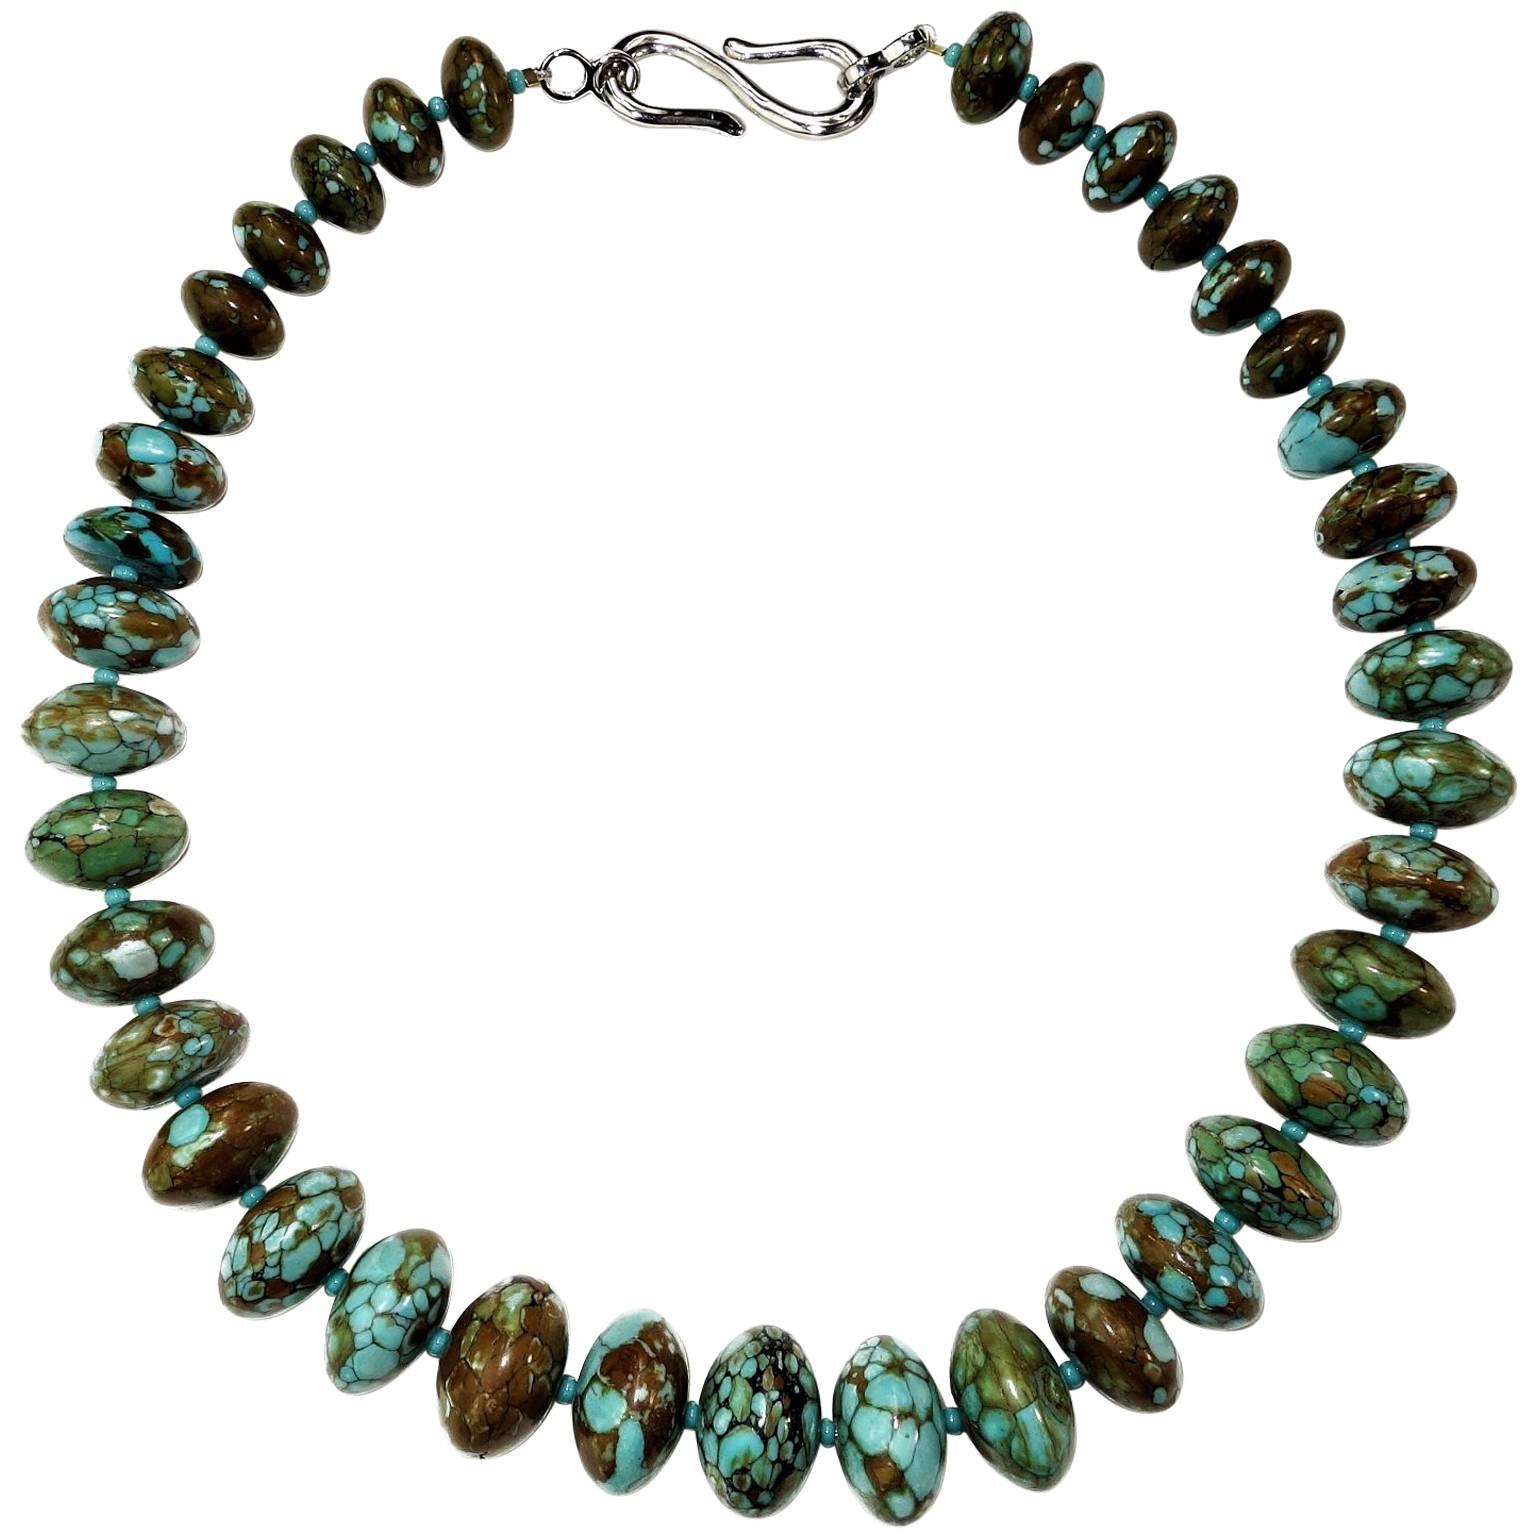 Chinese Graduated Turquoise Necklace